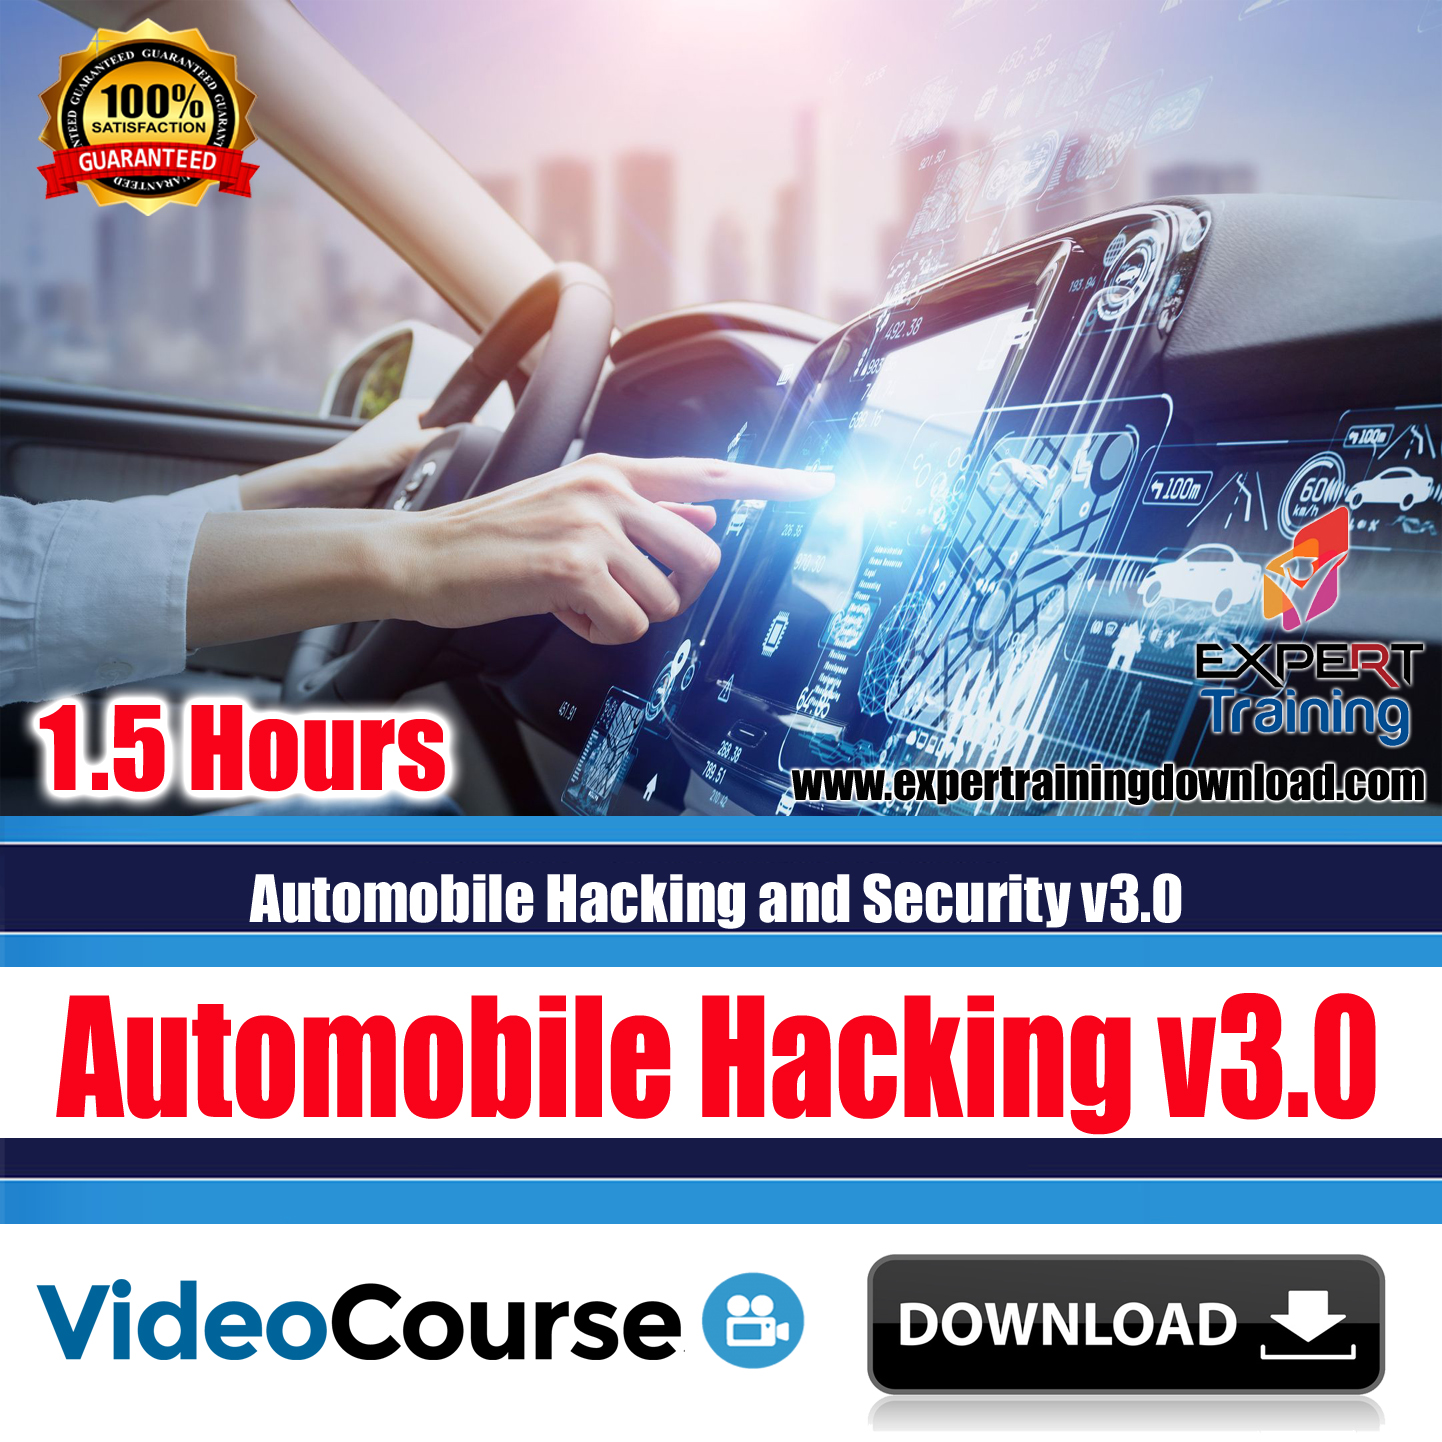 Automobile Hacking and Security v3.0